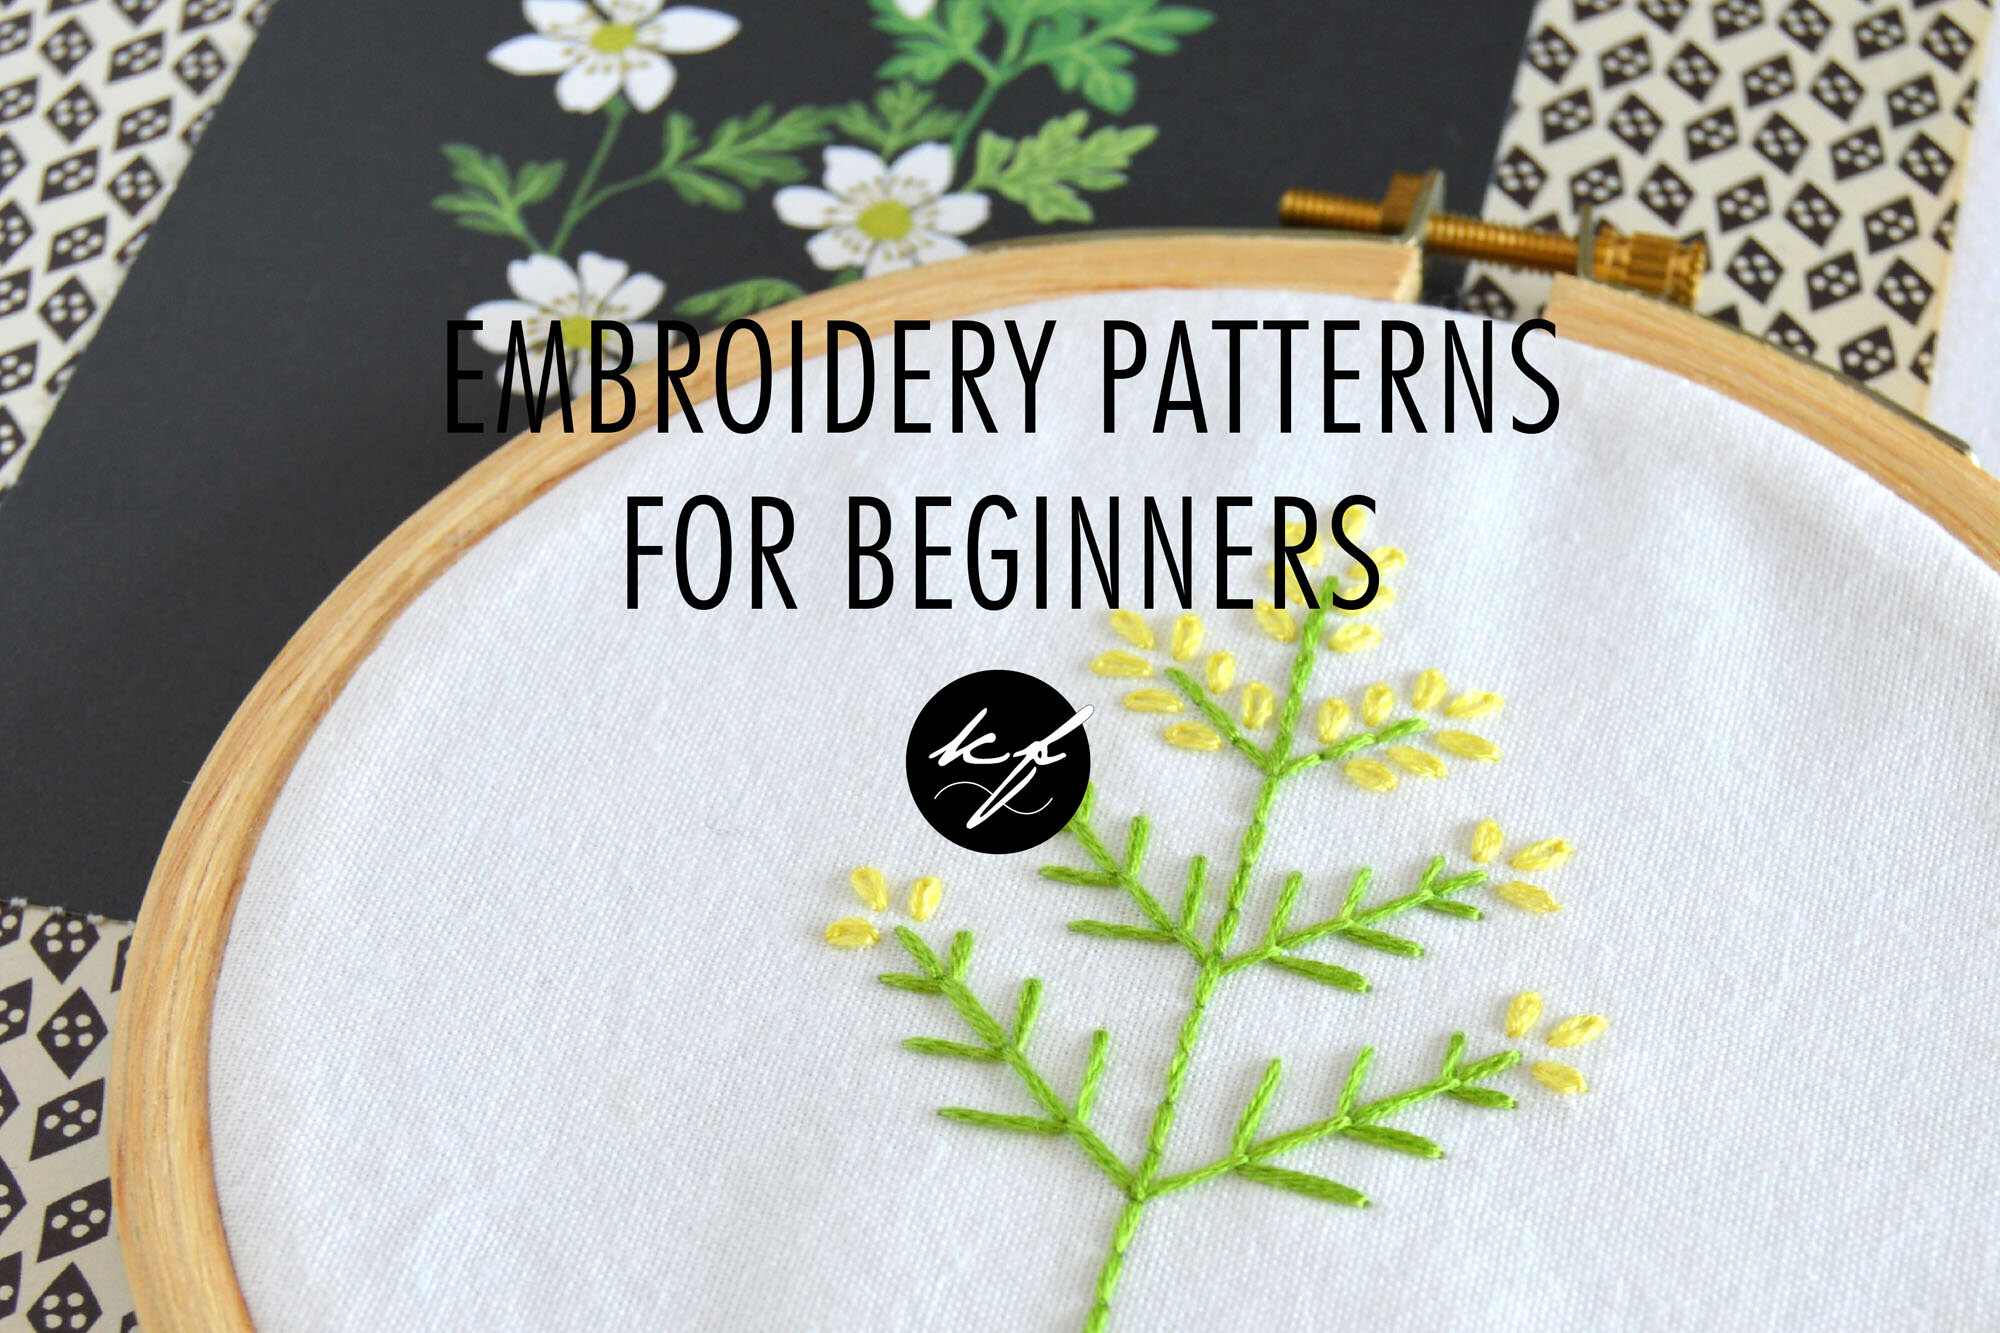 embroidery-patterns-for-beginners-kelly-fletcher-needlework-design